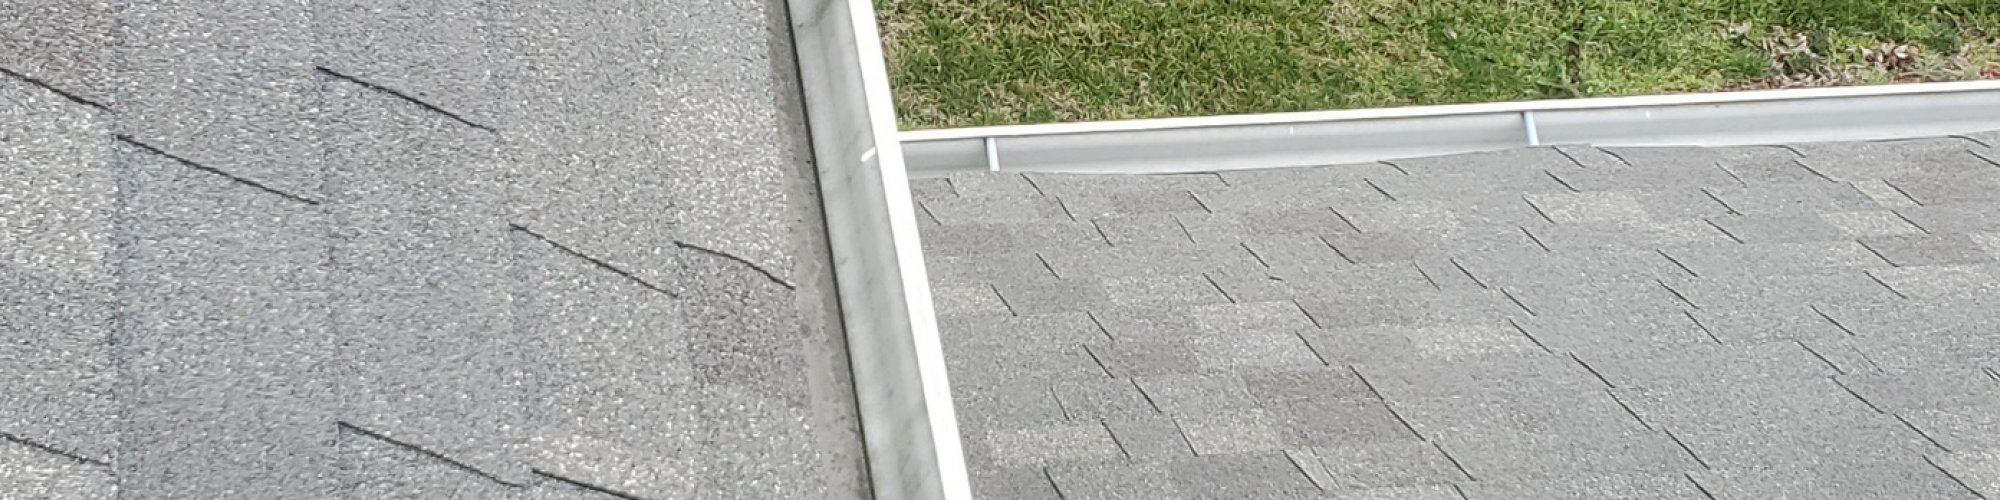 Clean Pro Gutter Cleaning Baton Rouge